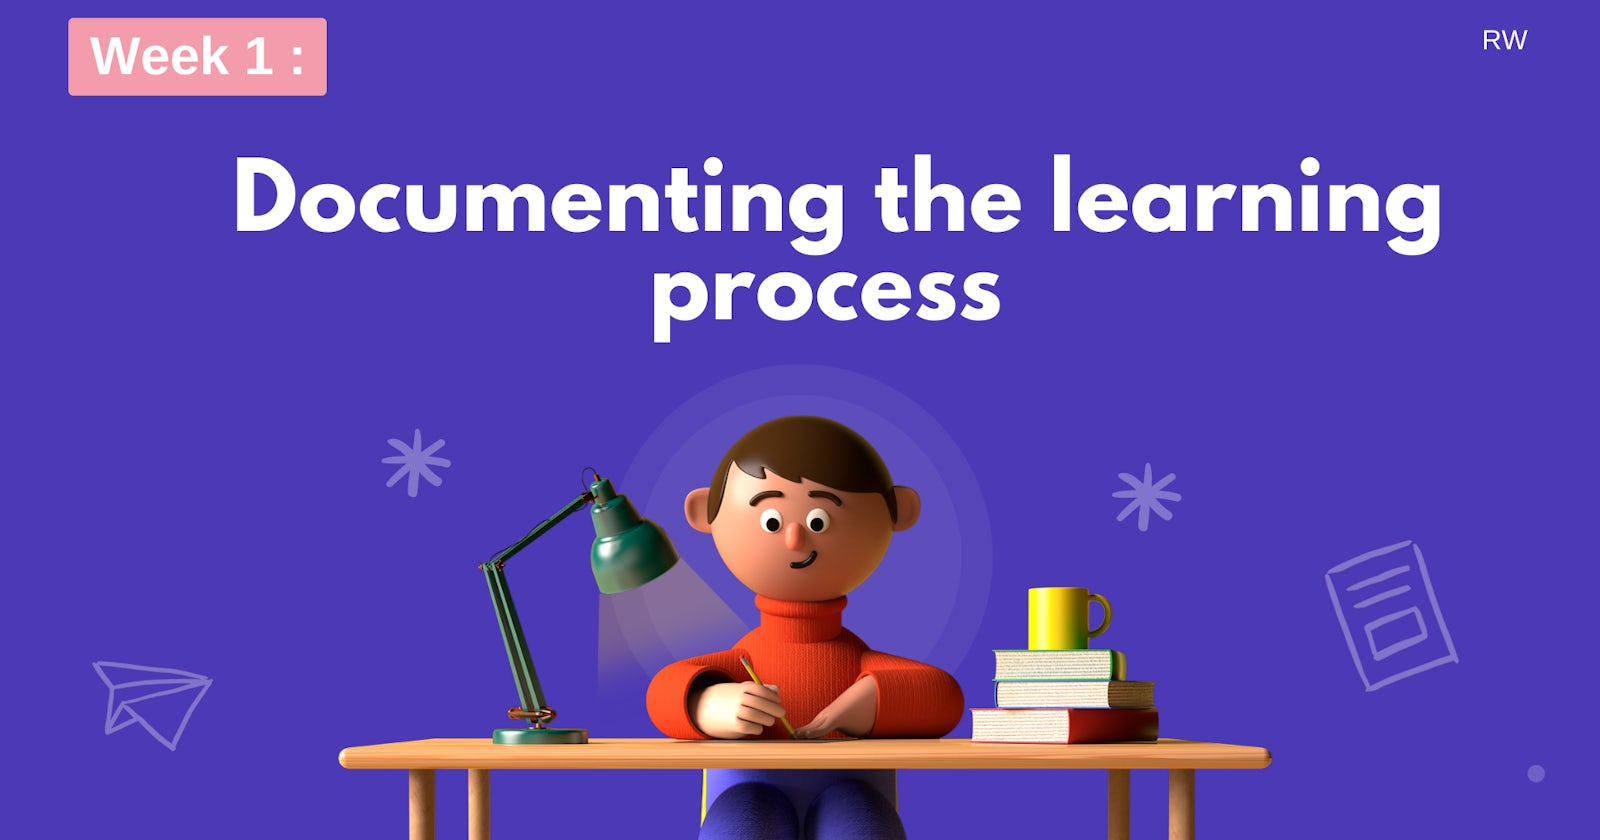 Week 1: Documenting the learning process